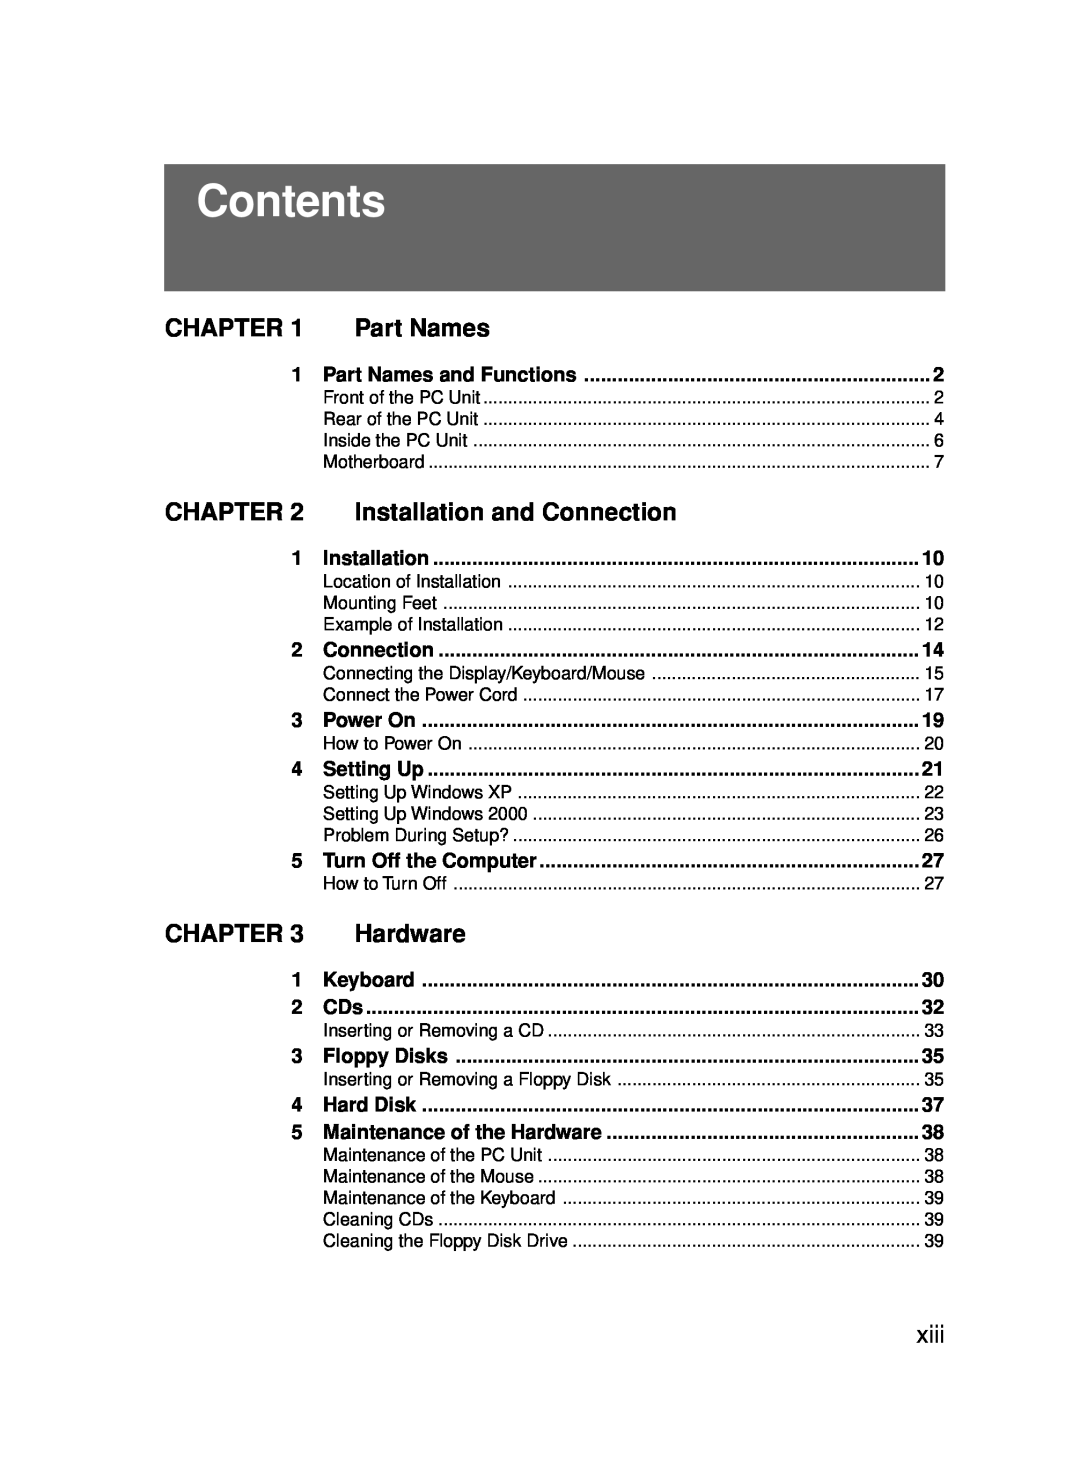 Fujitsu 5000 user manual Contents, Part Names, Installation and Connection, Hardware, xiii, Chapter 